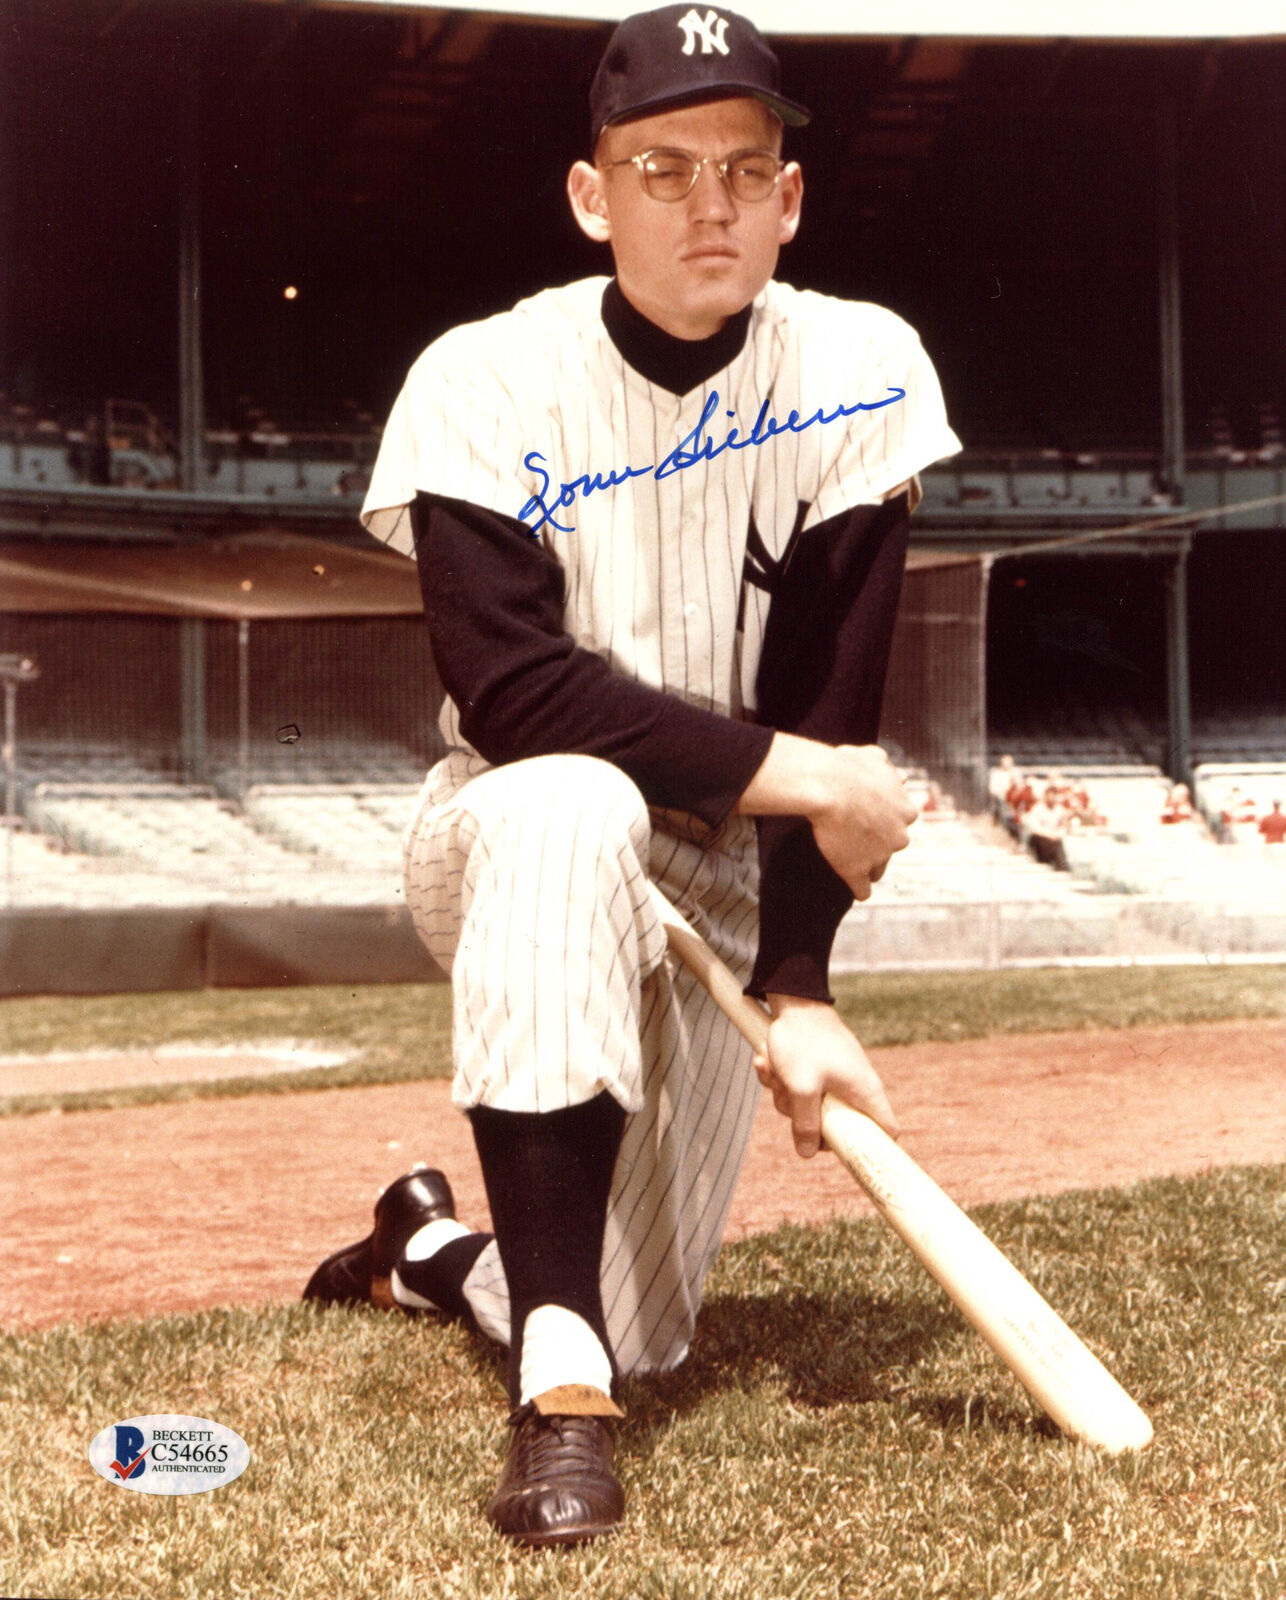 Yankees Norm Siebern Authentic Signed 8X10 Photo Poster painting Autographed BAS #C54665